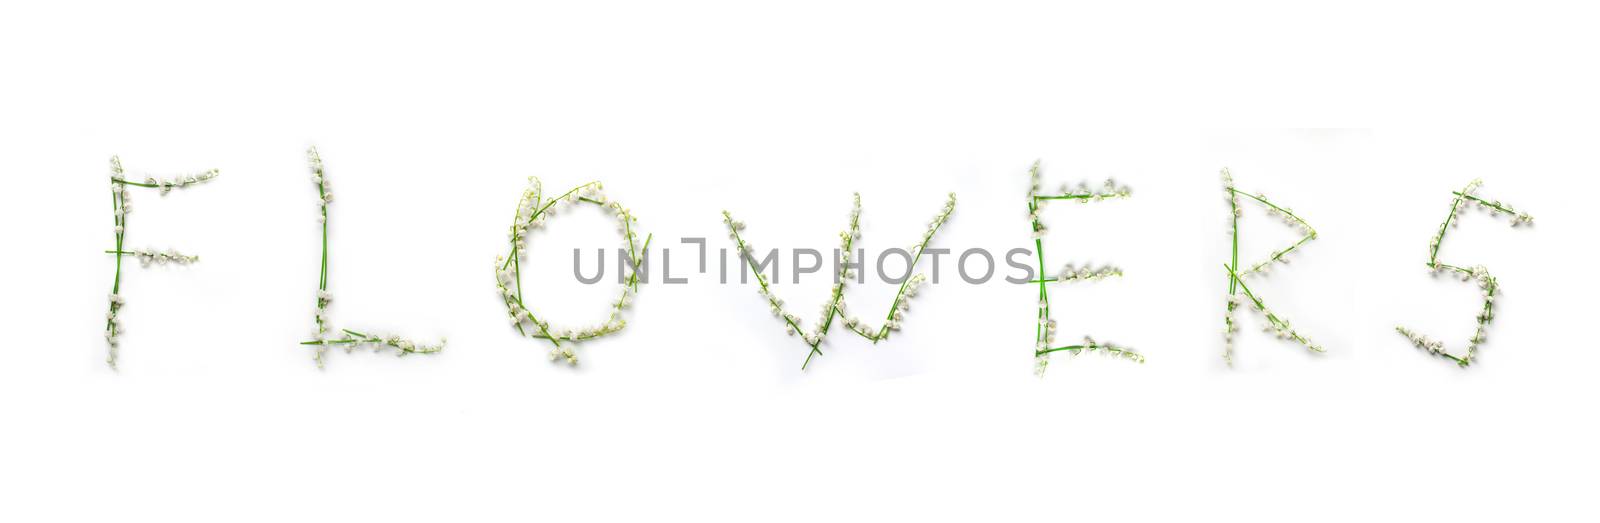 word of lily of the valley flowers isolated on white background by timonko